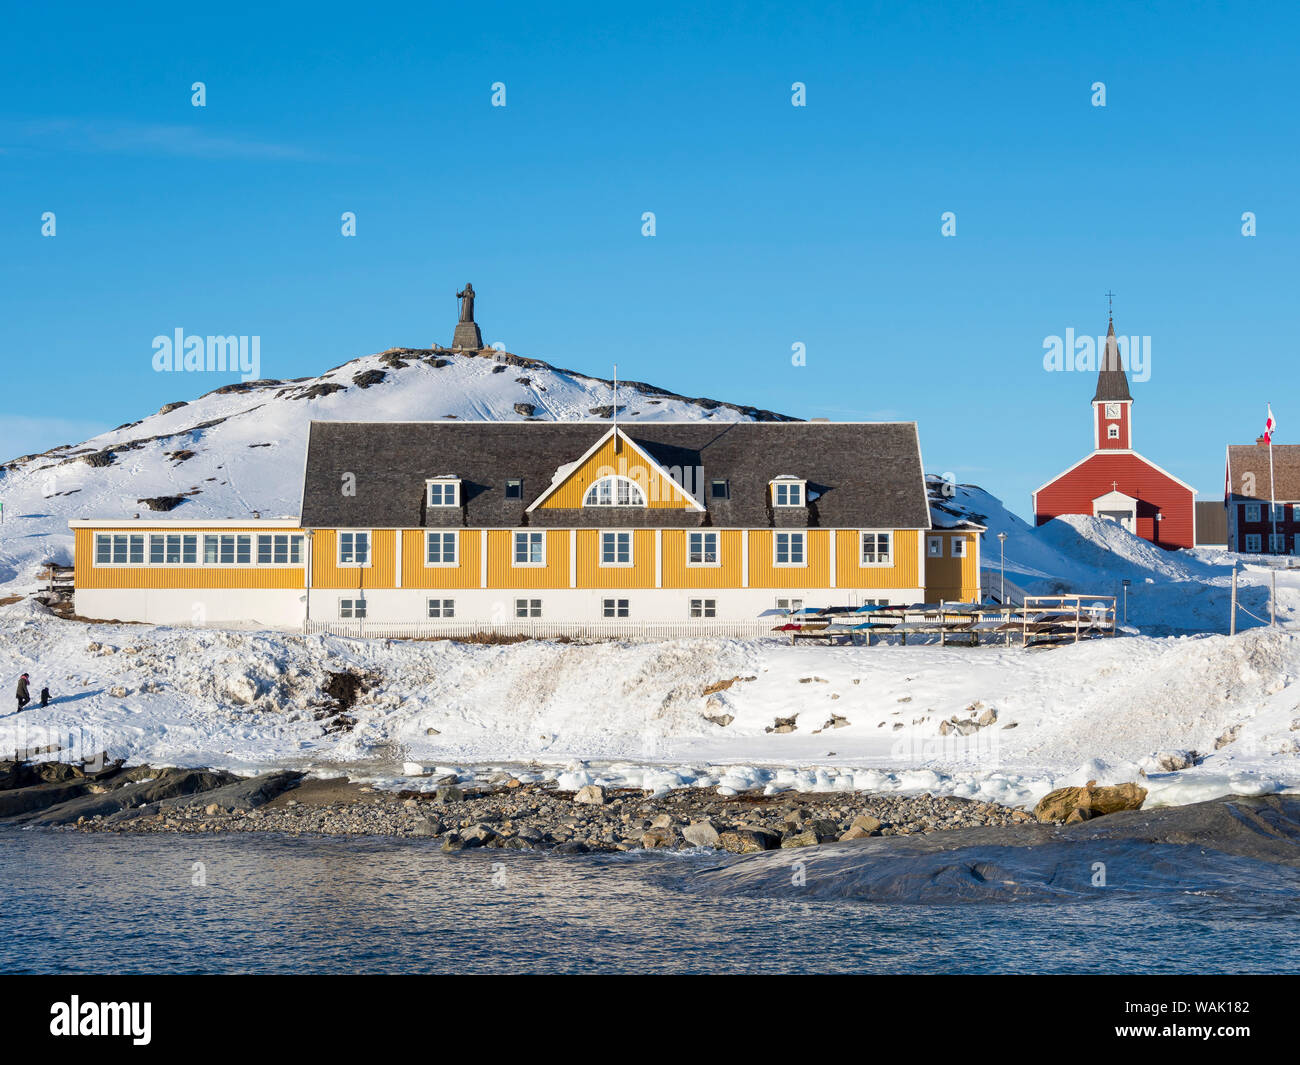 The old hospital. Nuuk, capital of Greenland. (Editorial Use Only) Stock Photo